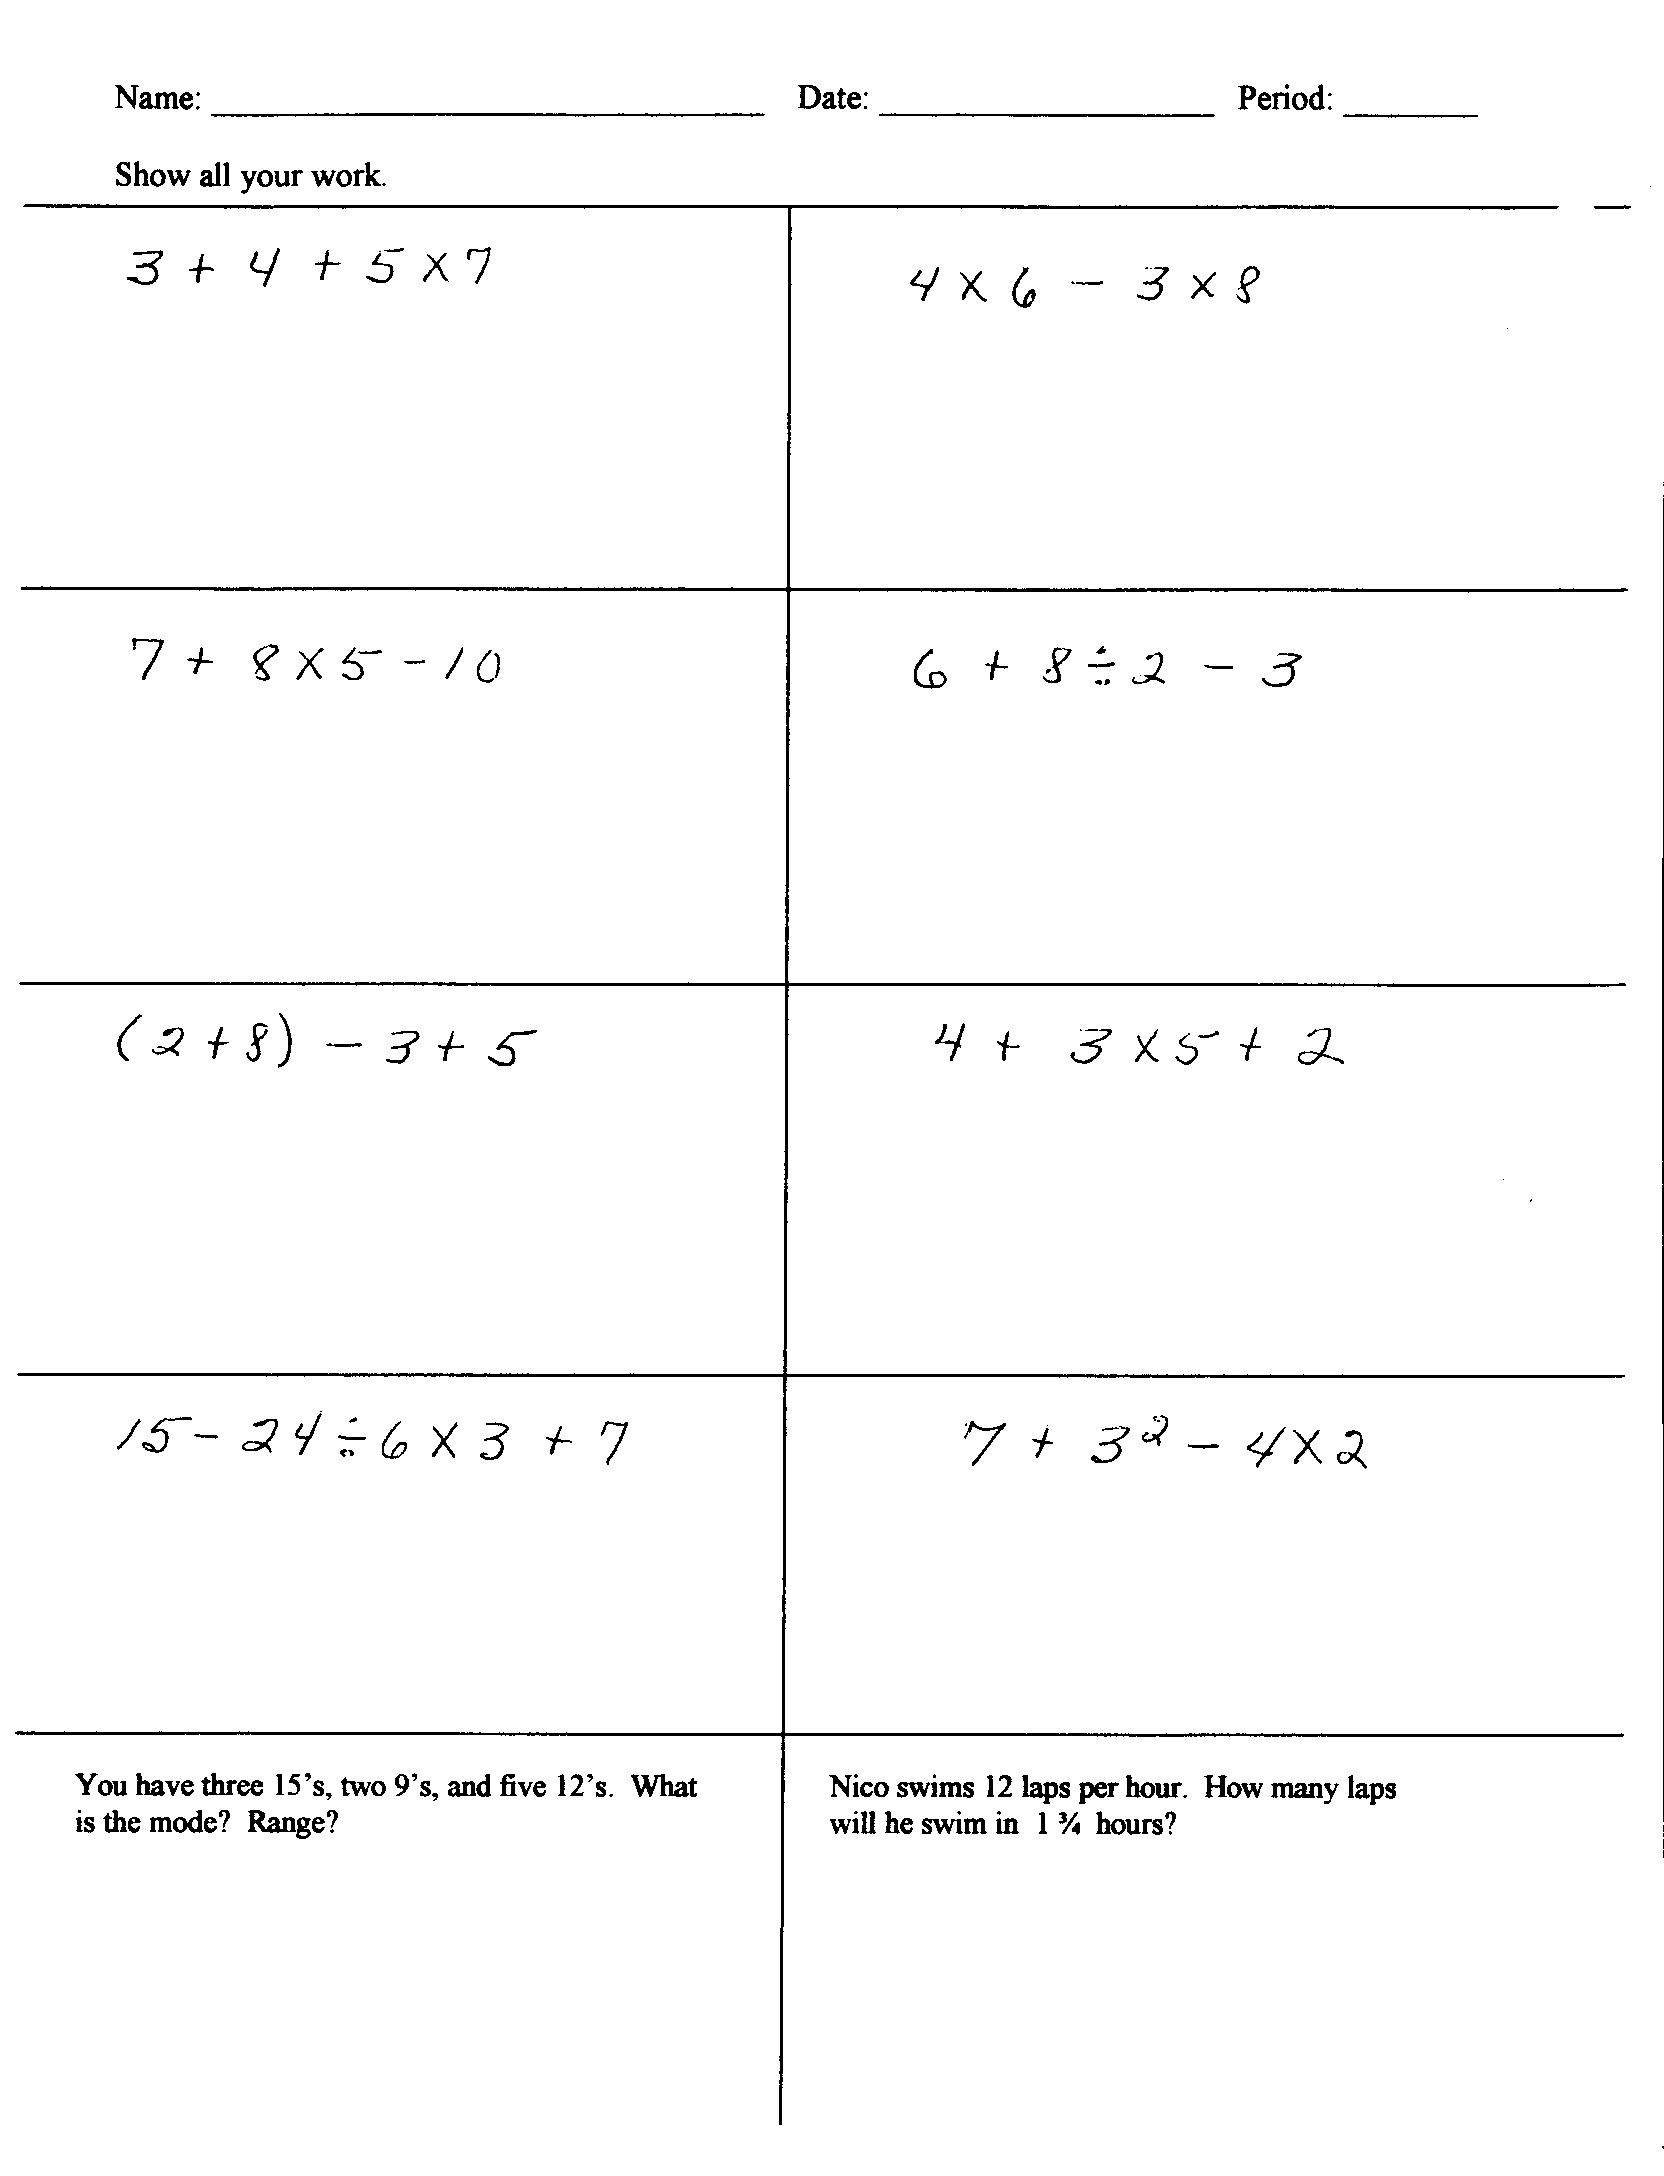 16 Best Images Of Bodmas Worksheets With Answers 6th Grade Hard Math Problems Bedmas 6th 